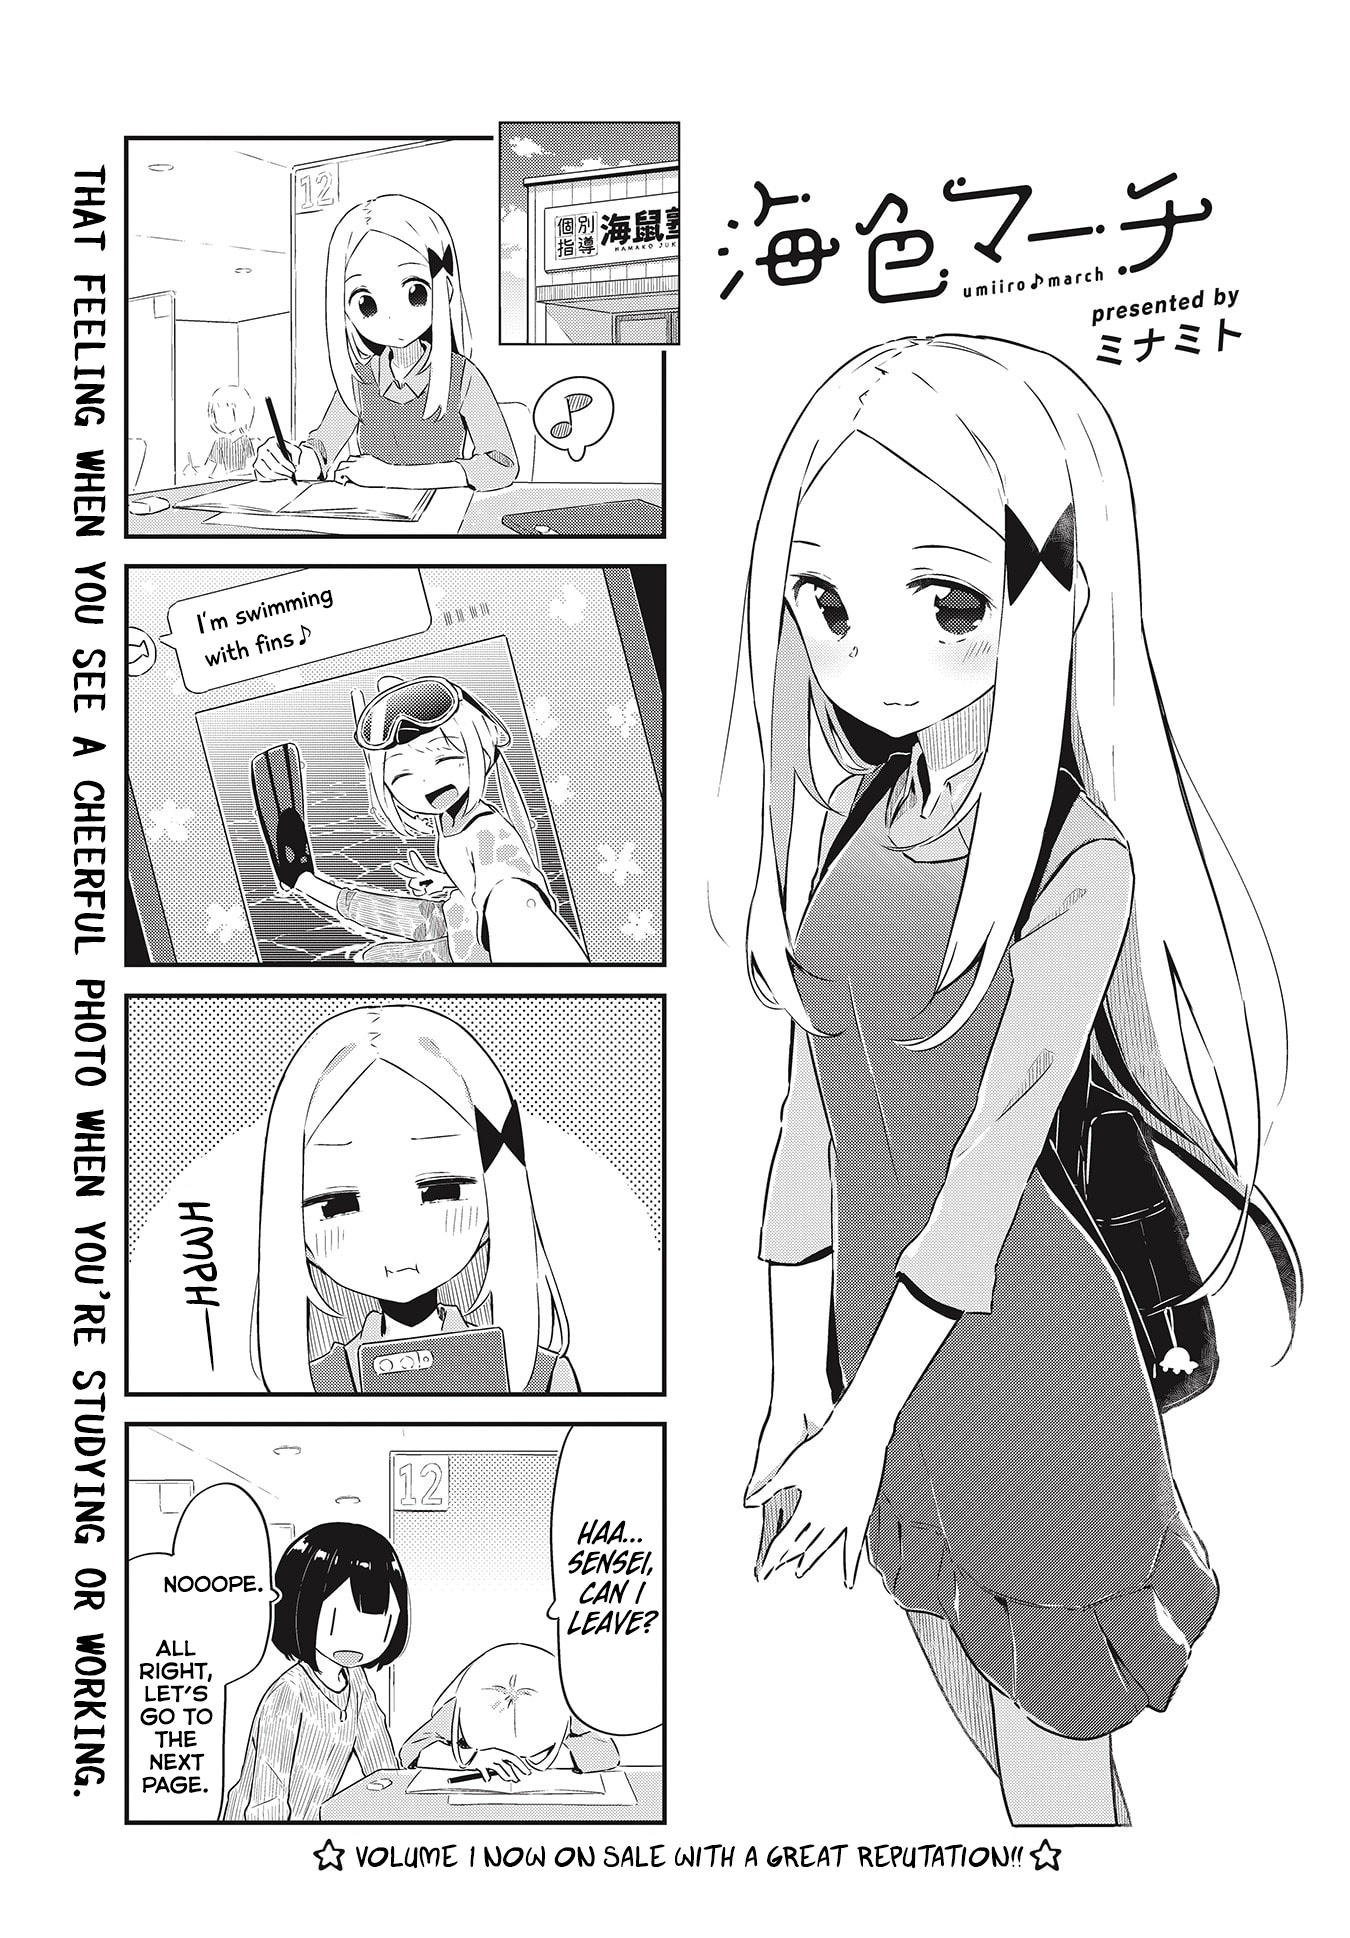 Umiiro March Chapter 20 #2